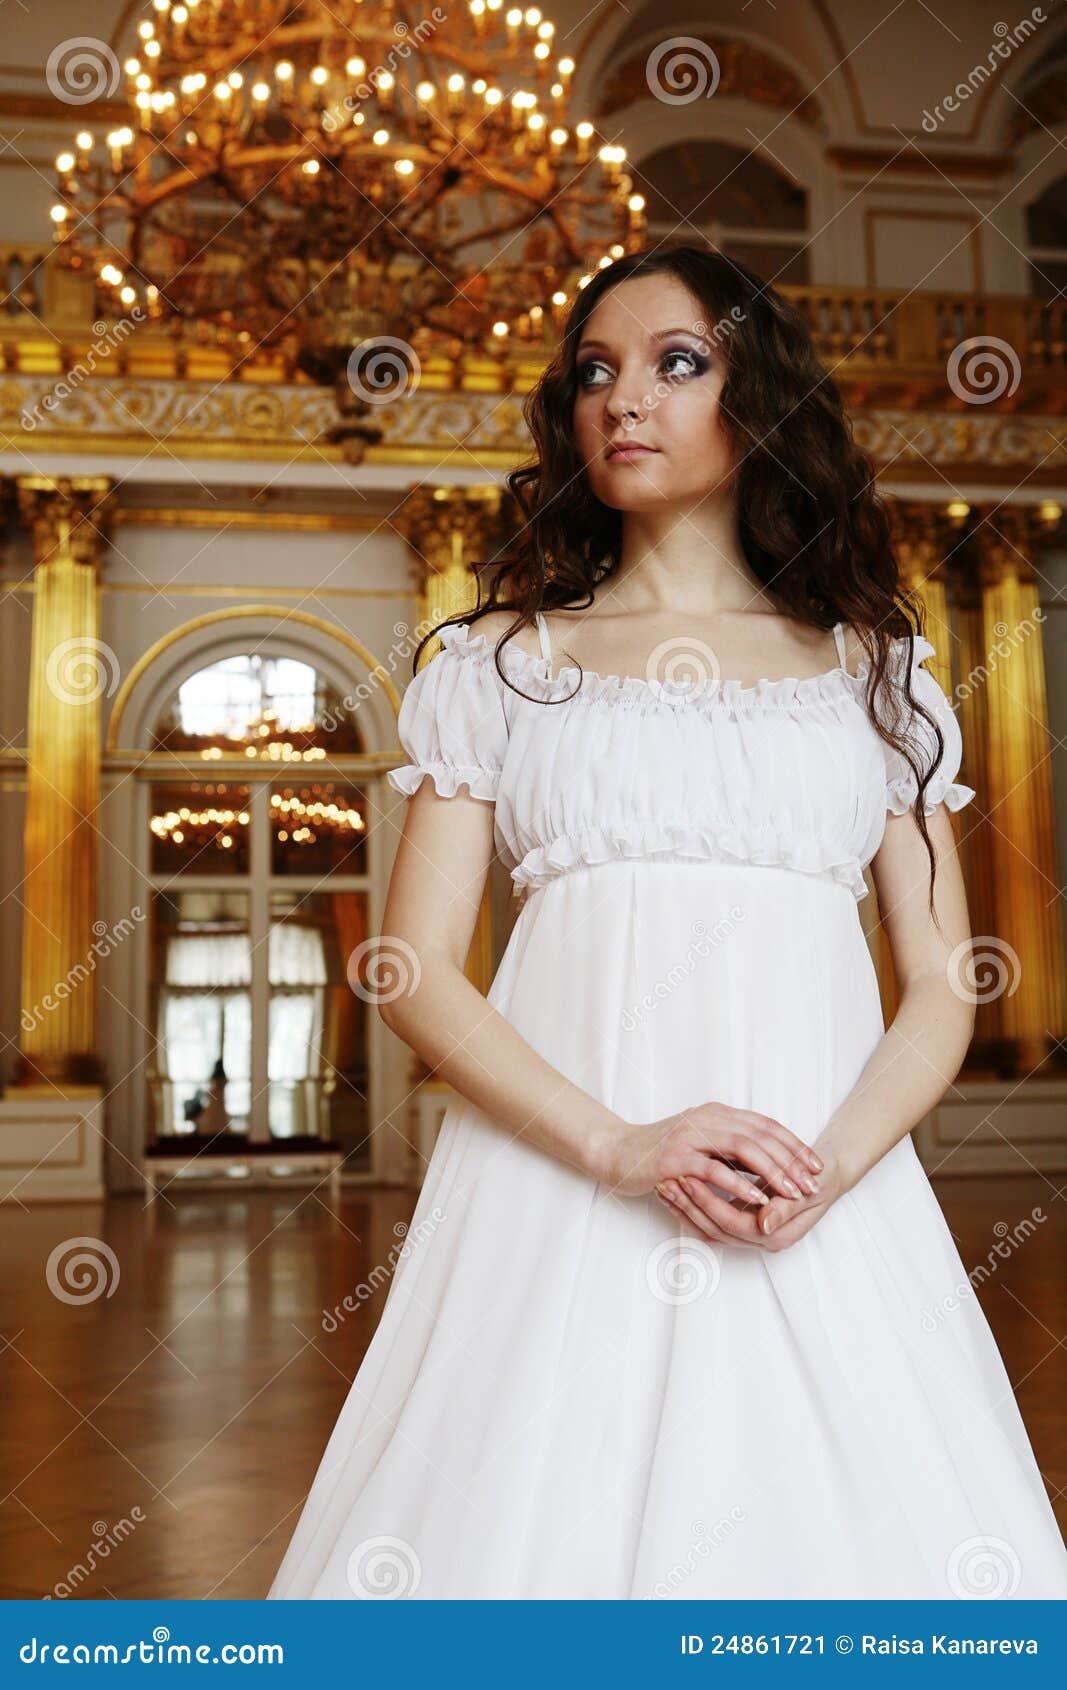 4,798 Beautiful Woman White Dress Flying Fabric Royalty-Free Images, Stock  Photos & Pictures | Shutterstock